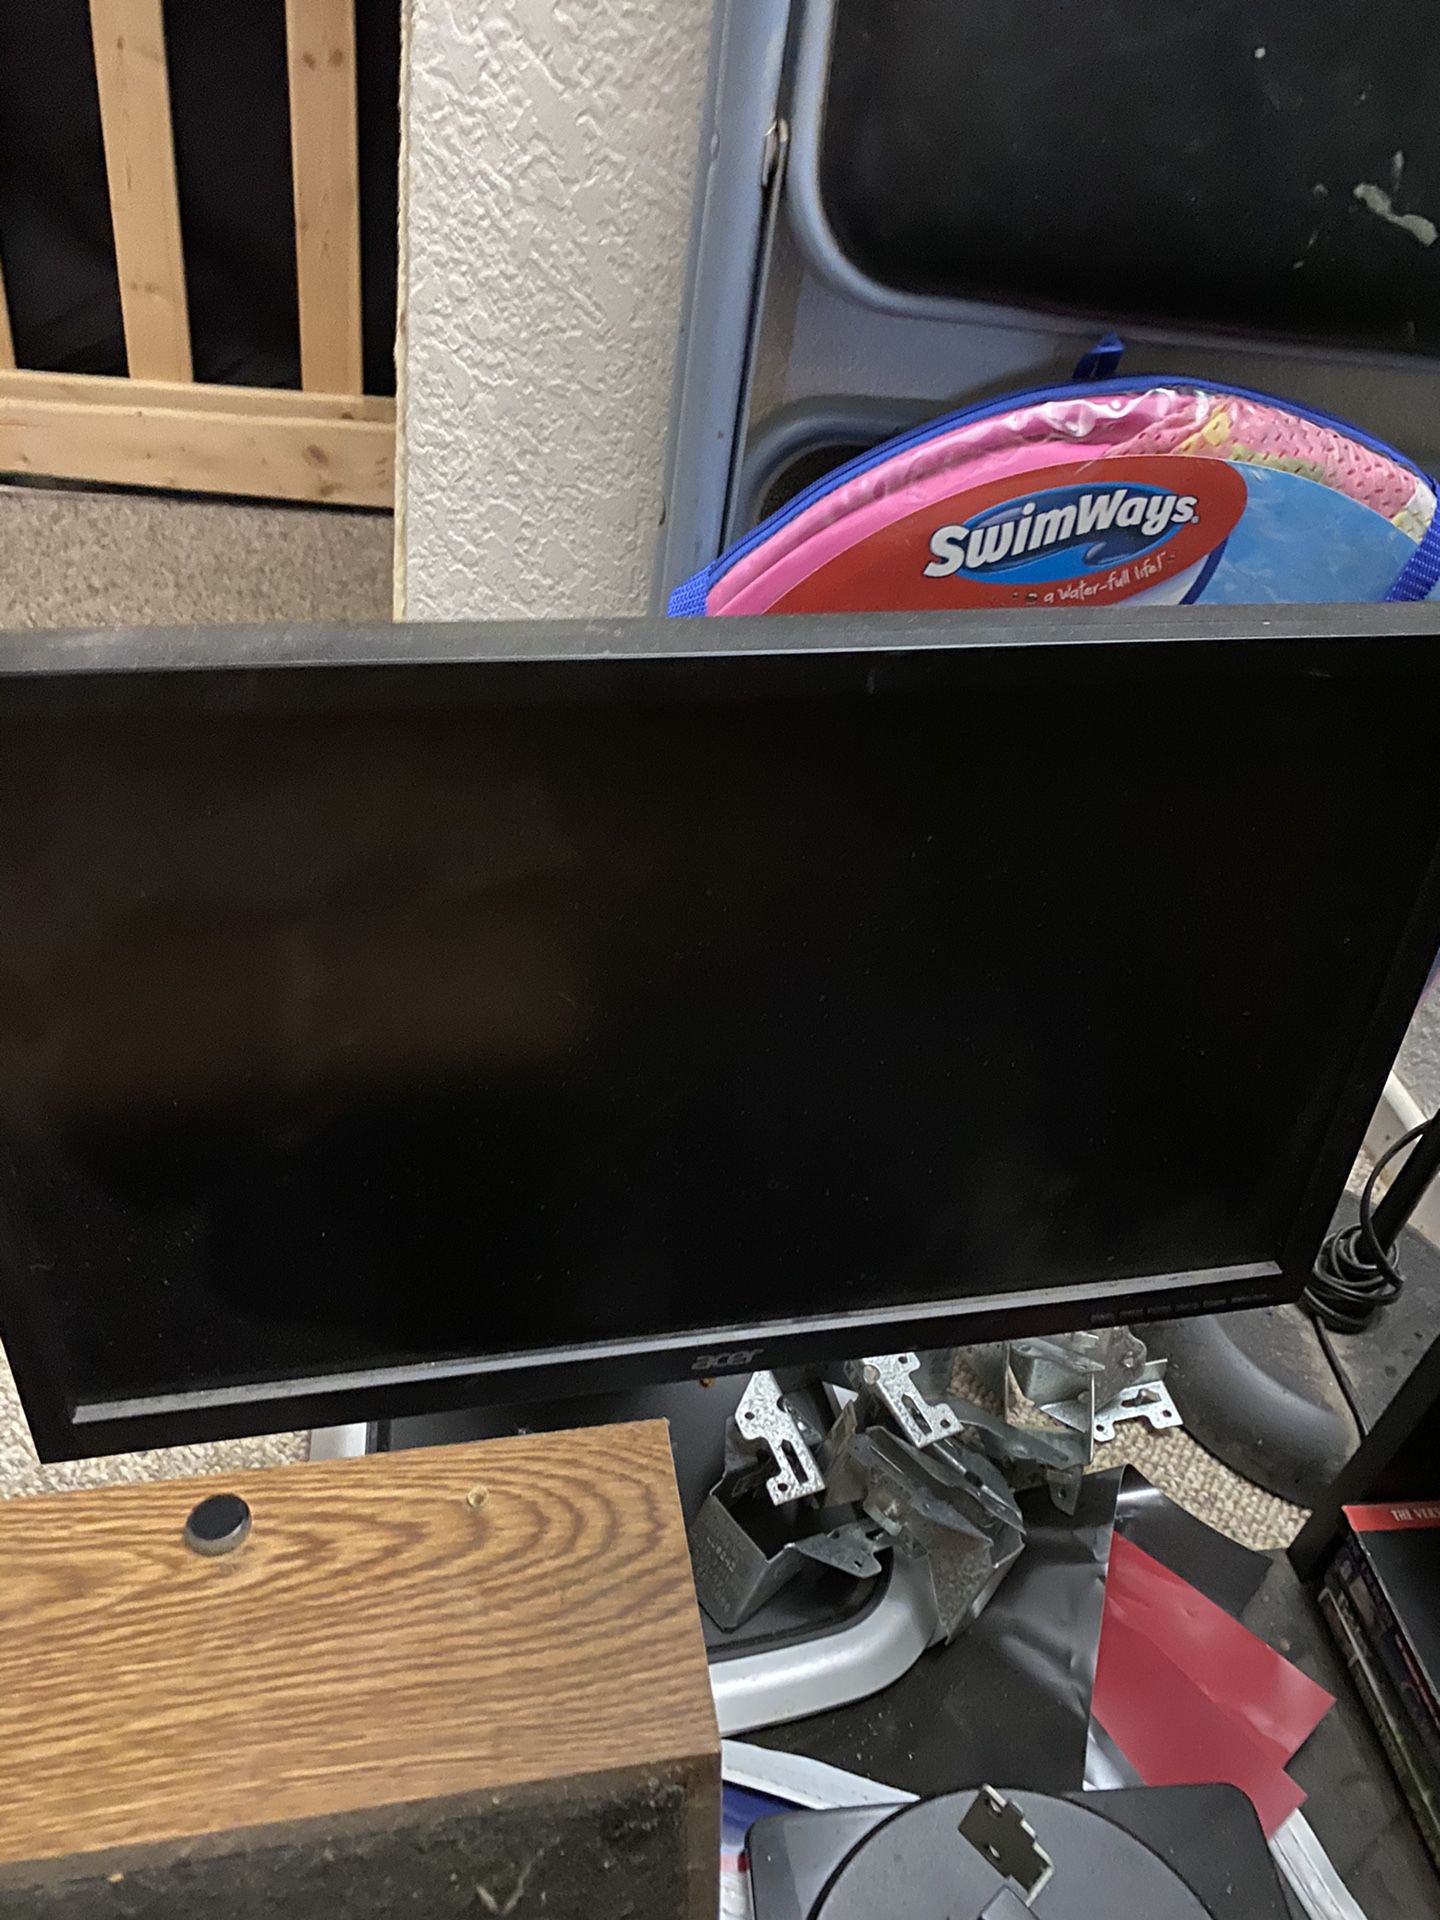 Acer 19” computer monitor